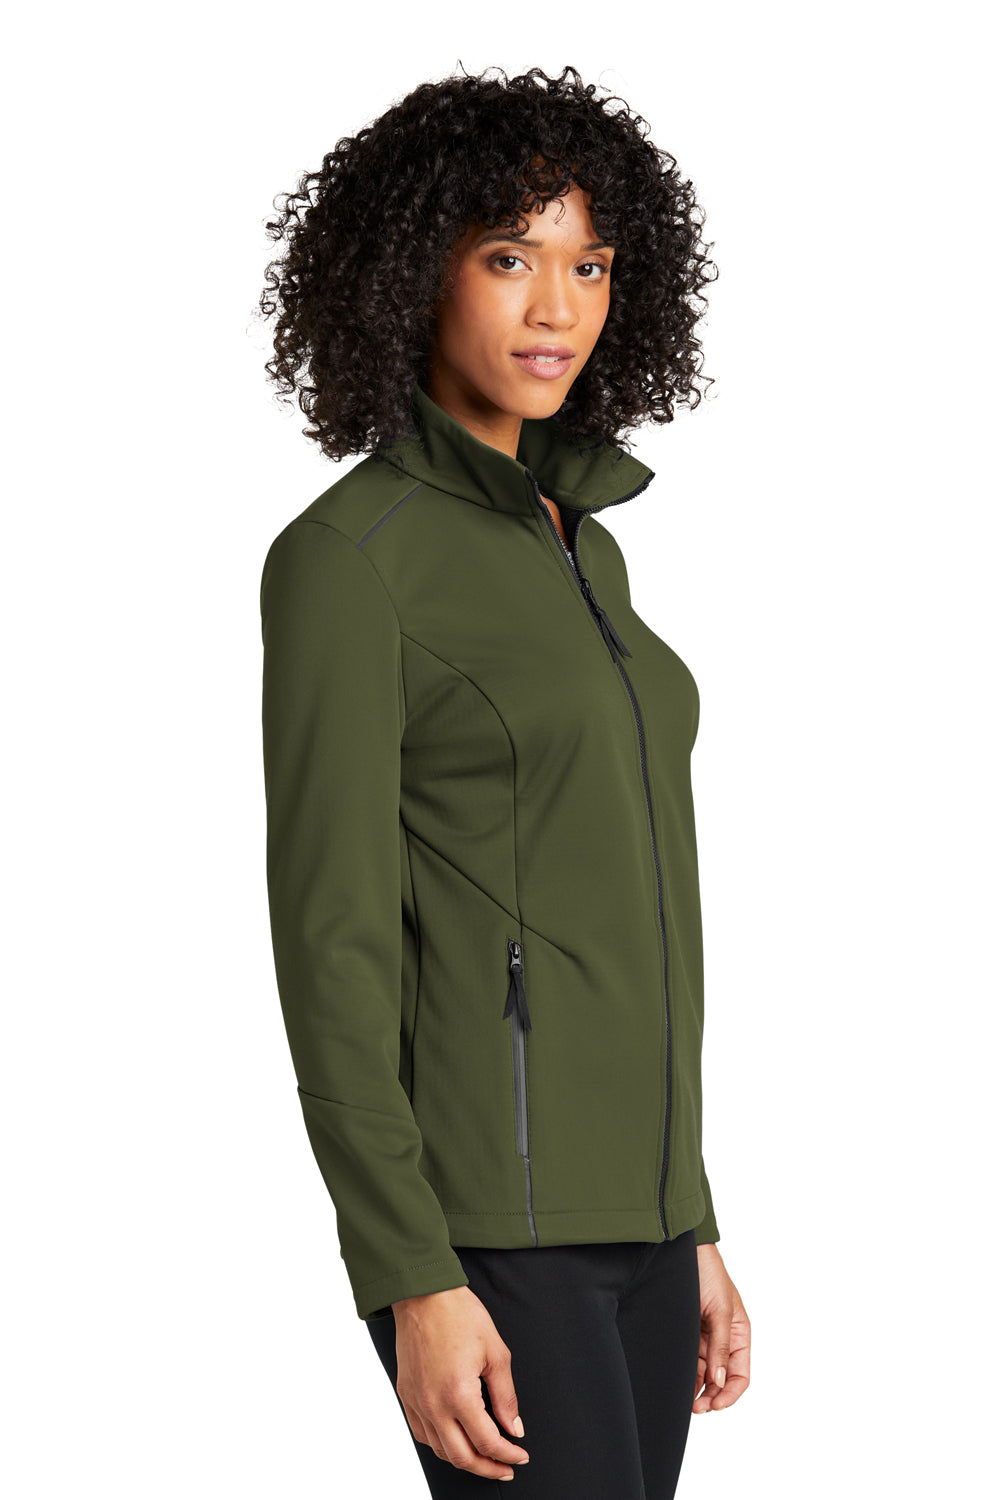 Port Authority L921 Collective Tech Full Zip Soft Shell Jacket Olive Green 3Q